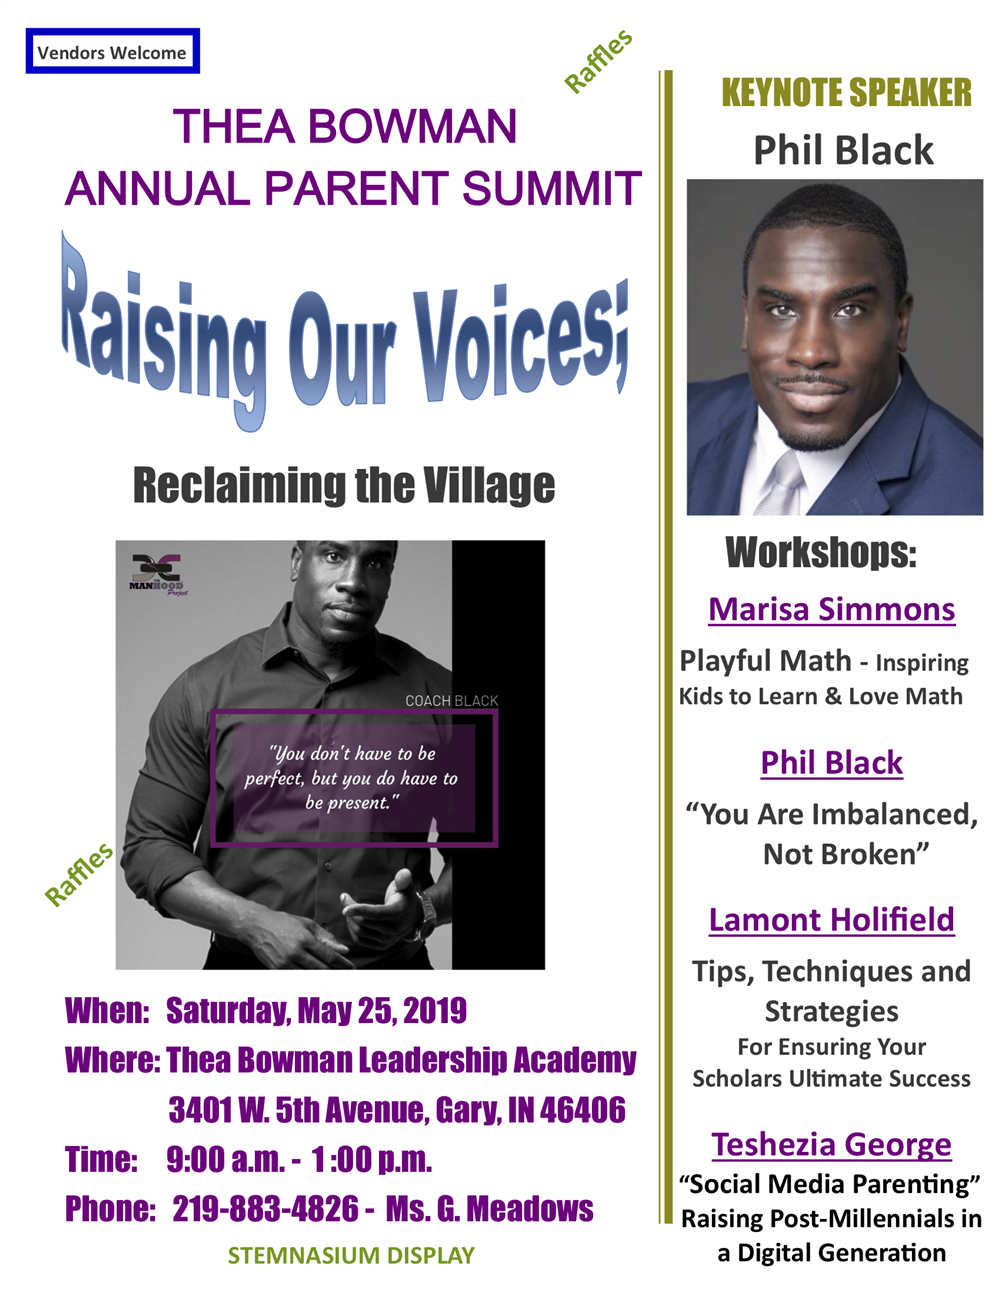 Thea Bowman Leadership Academy to host annual summit on Saturday, May 25 